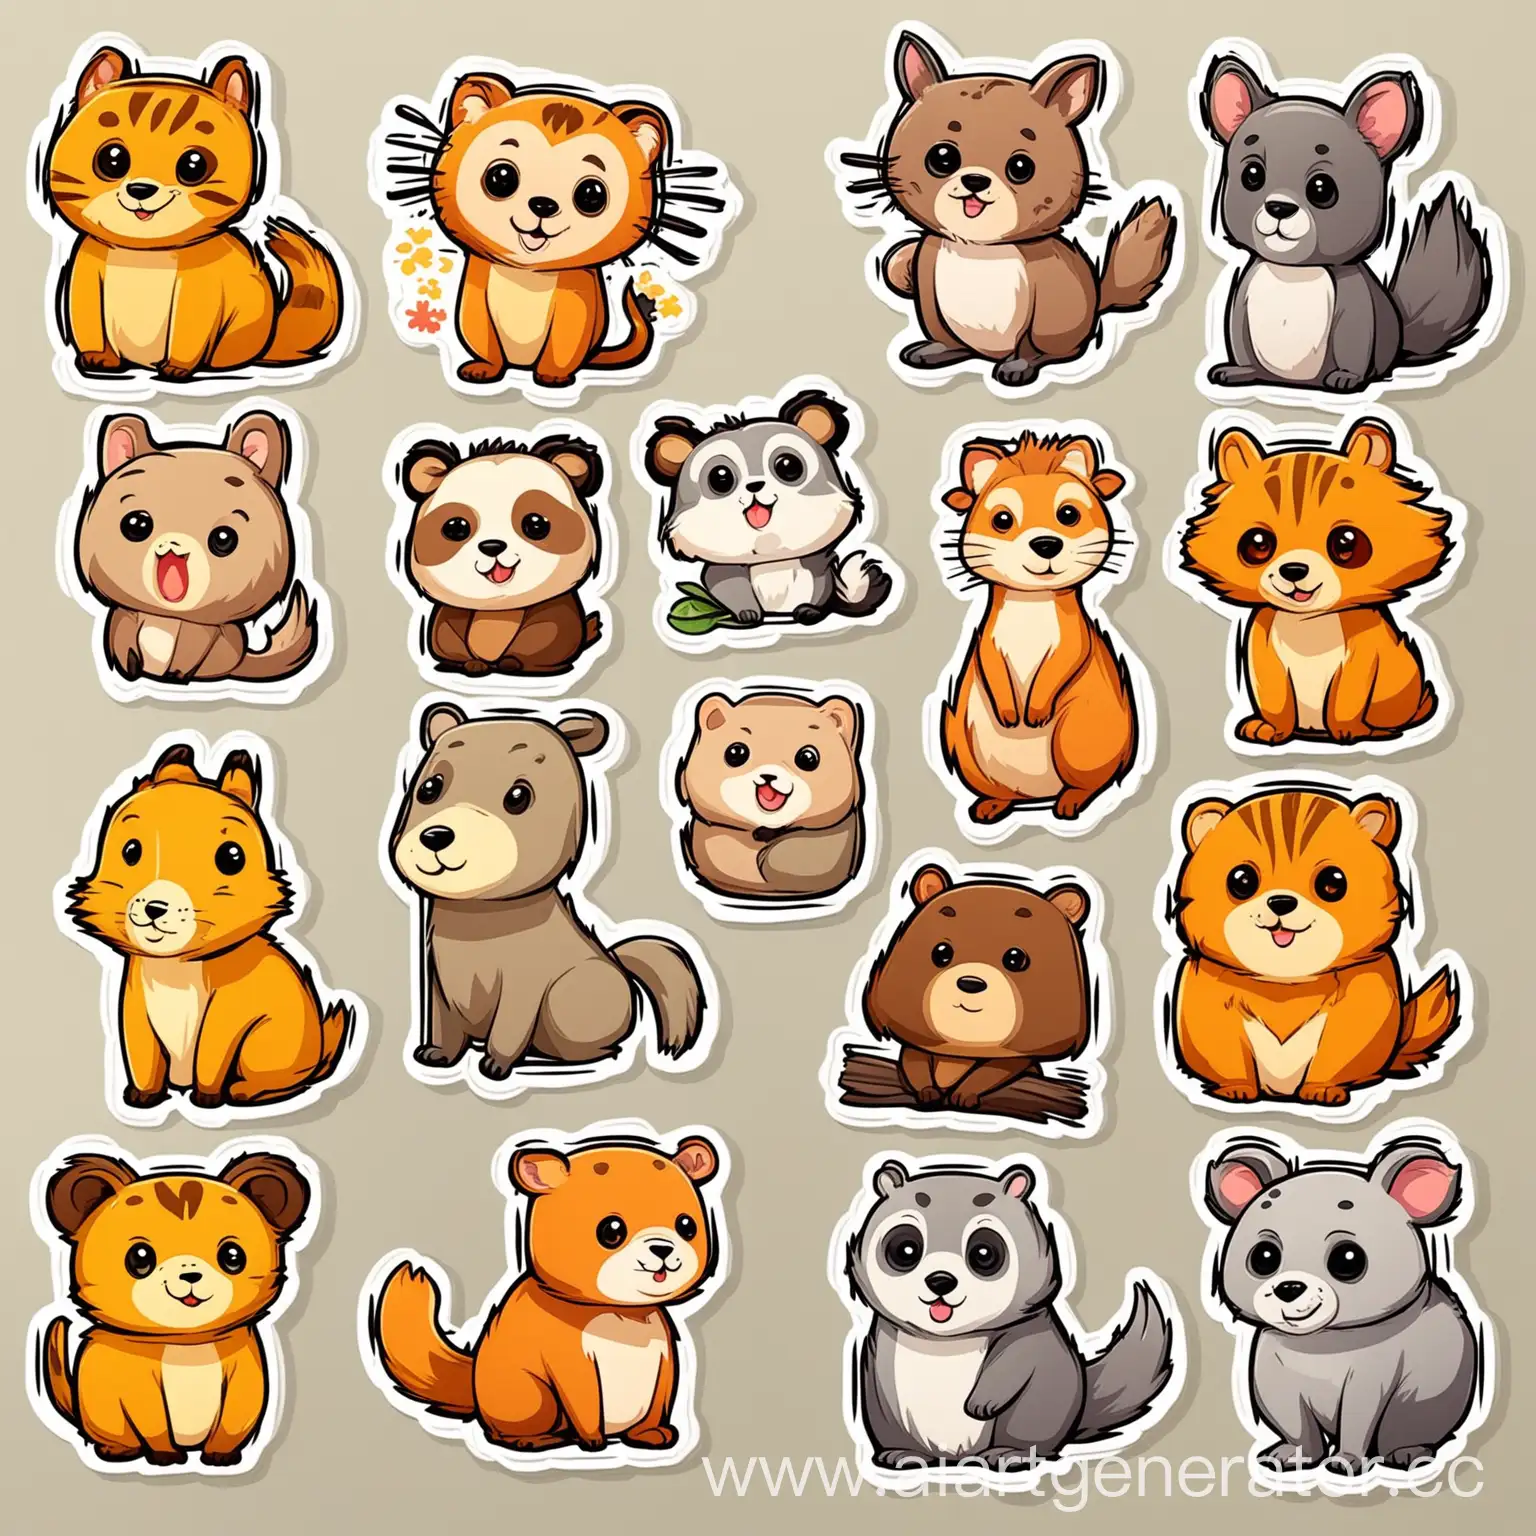 Colorful-Cartoon-Stickers-with-Playful-Animals